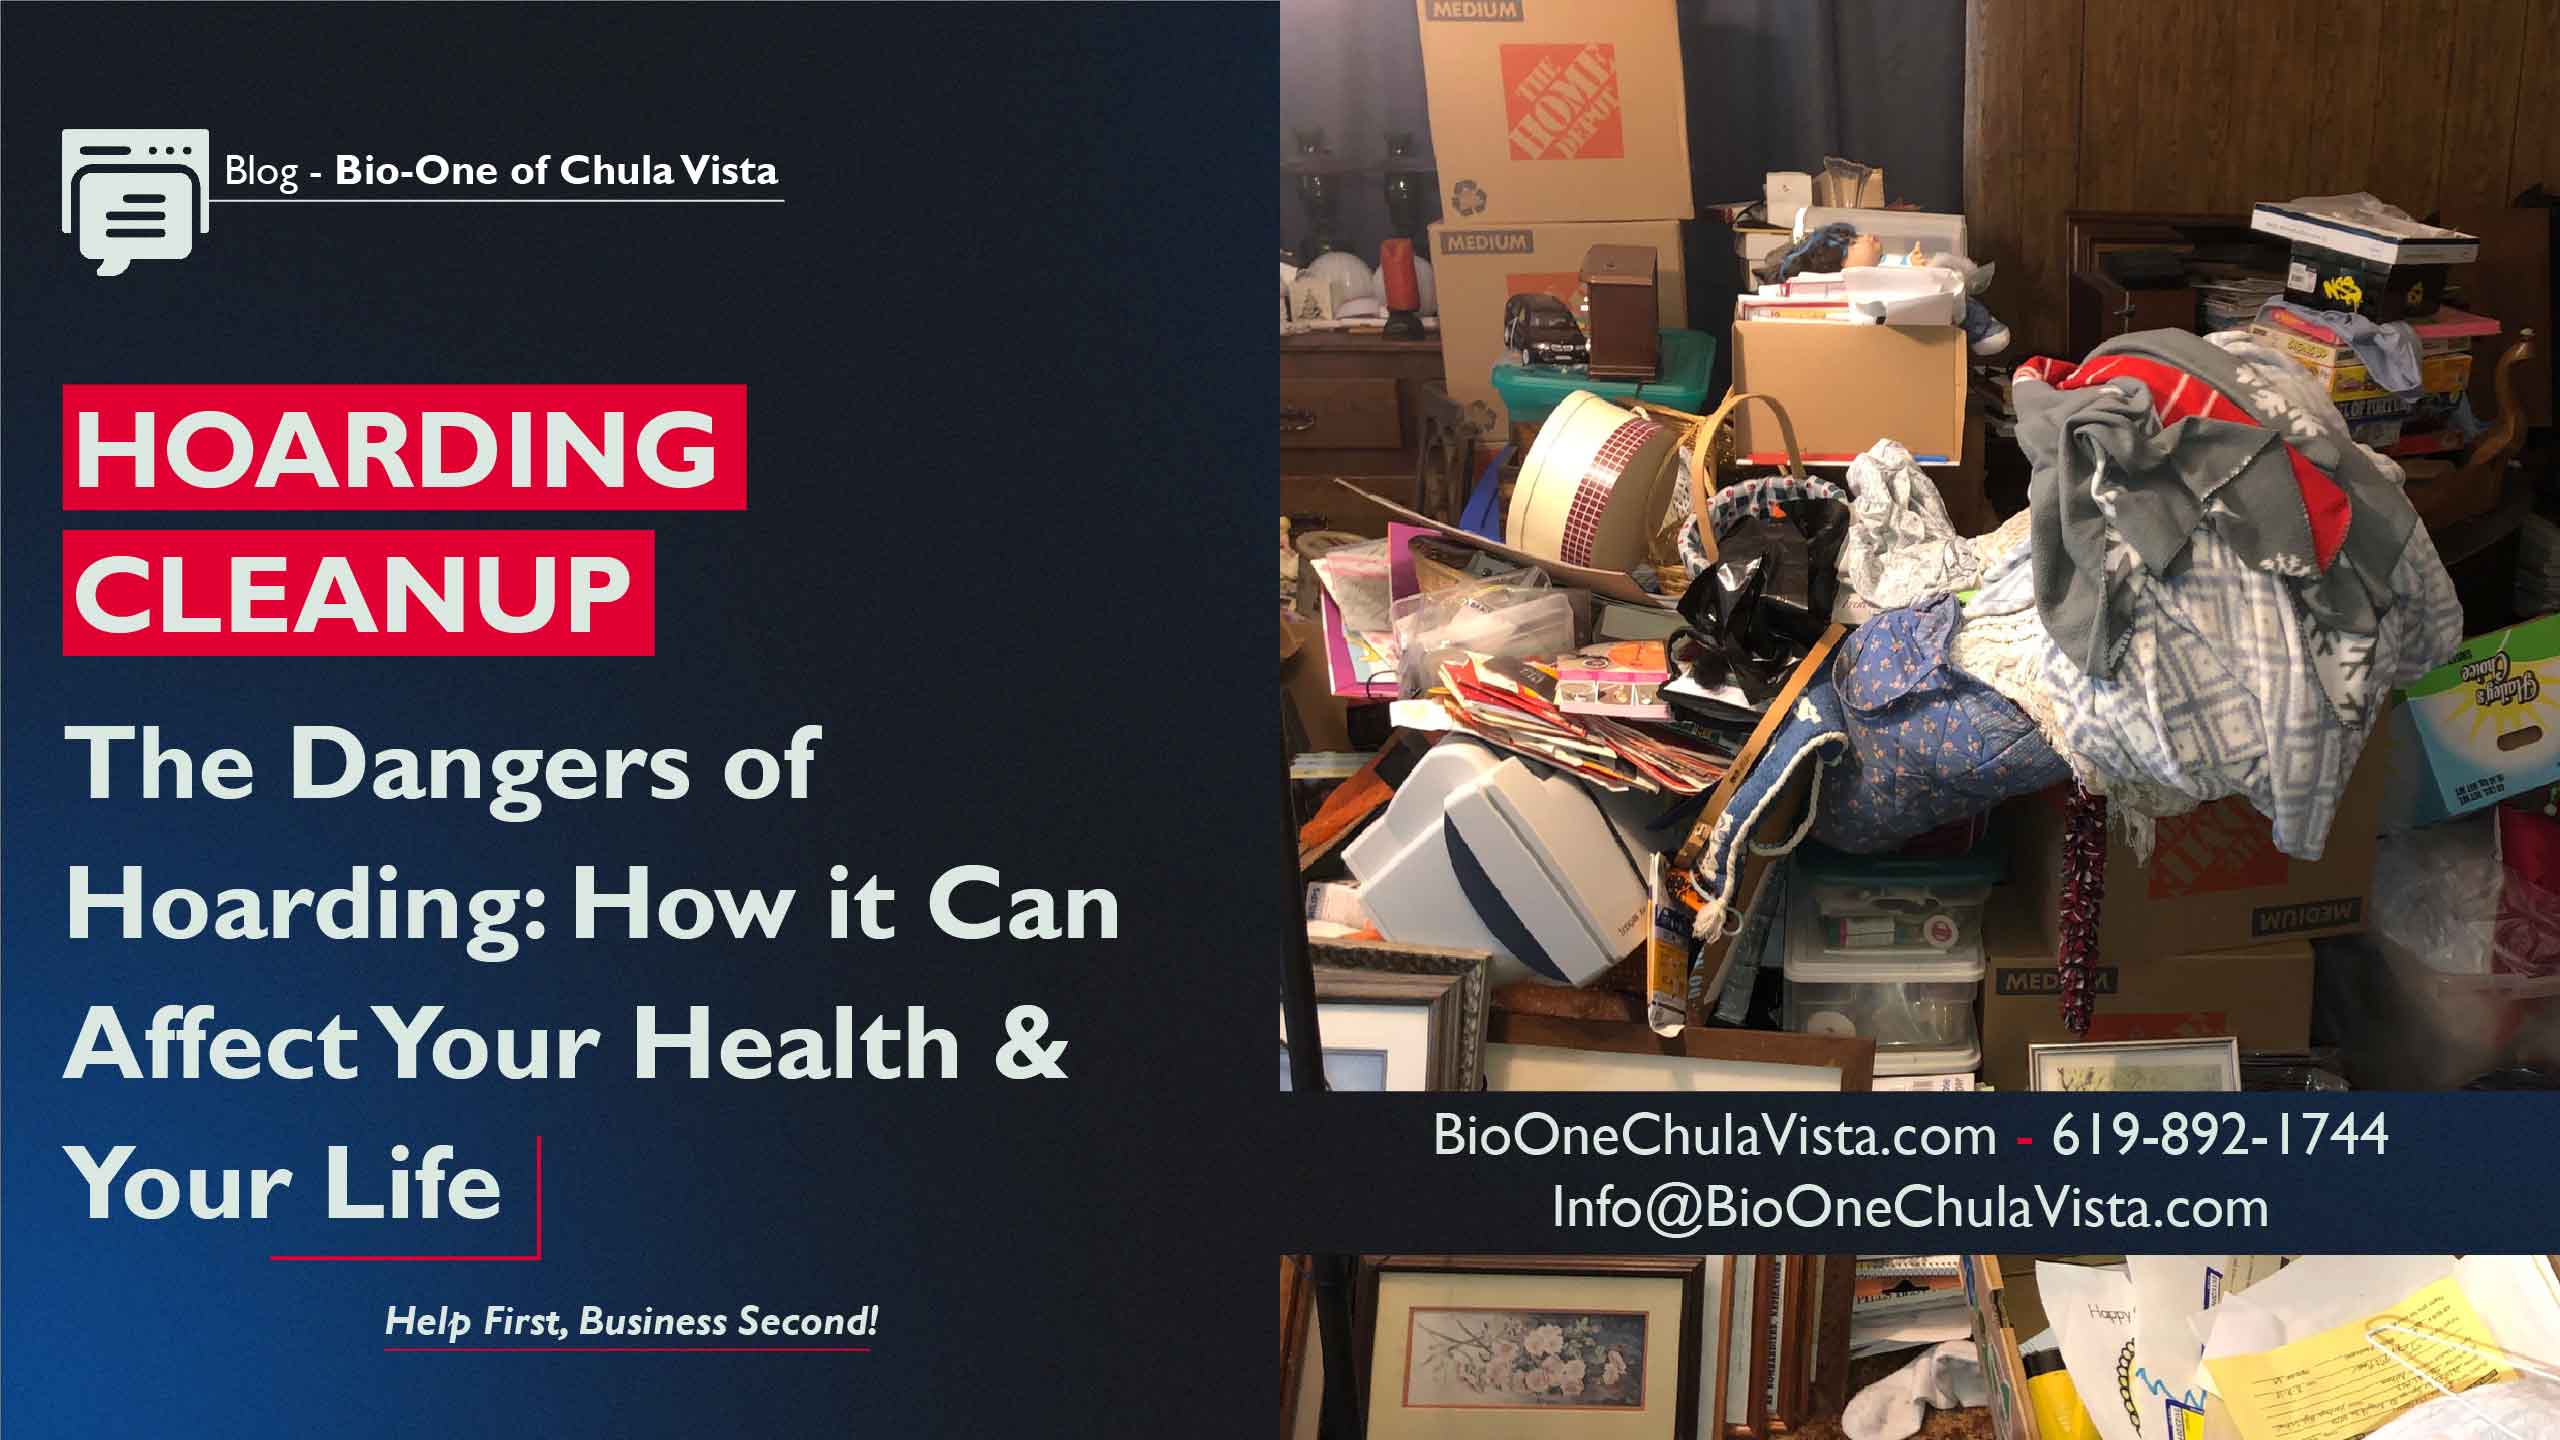 The Dangers of Hoarding: How it Can Affect Your Health & Your Life